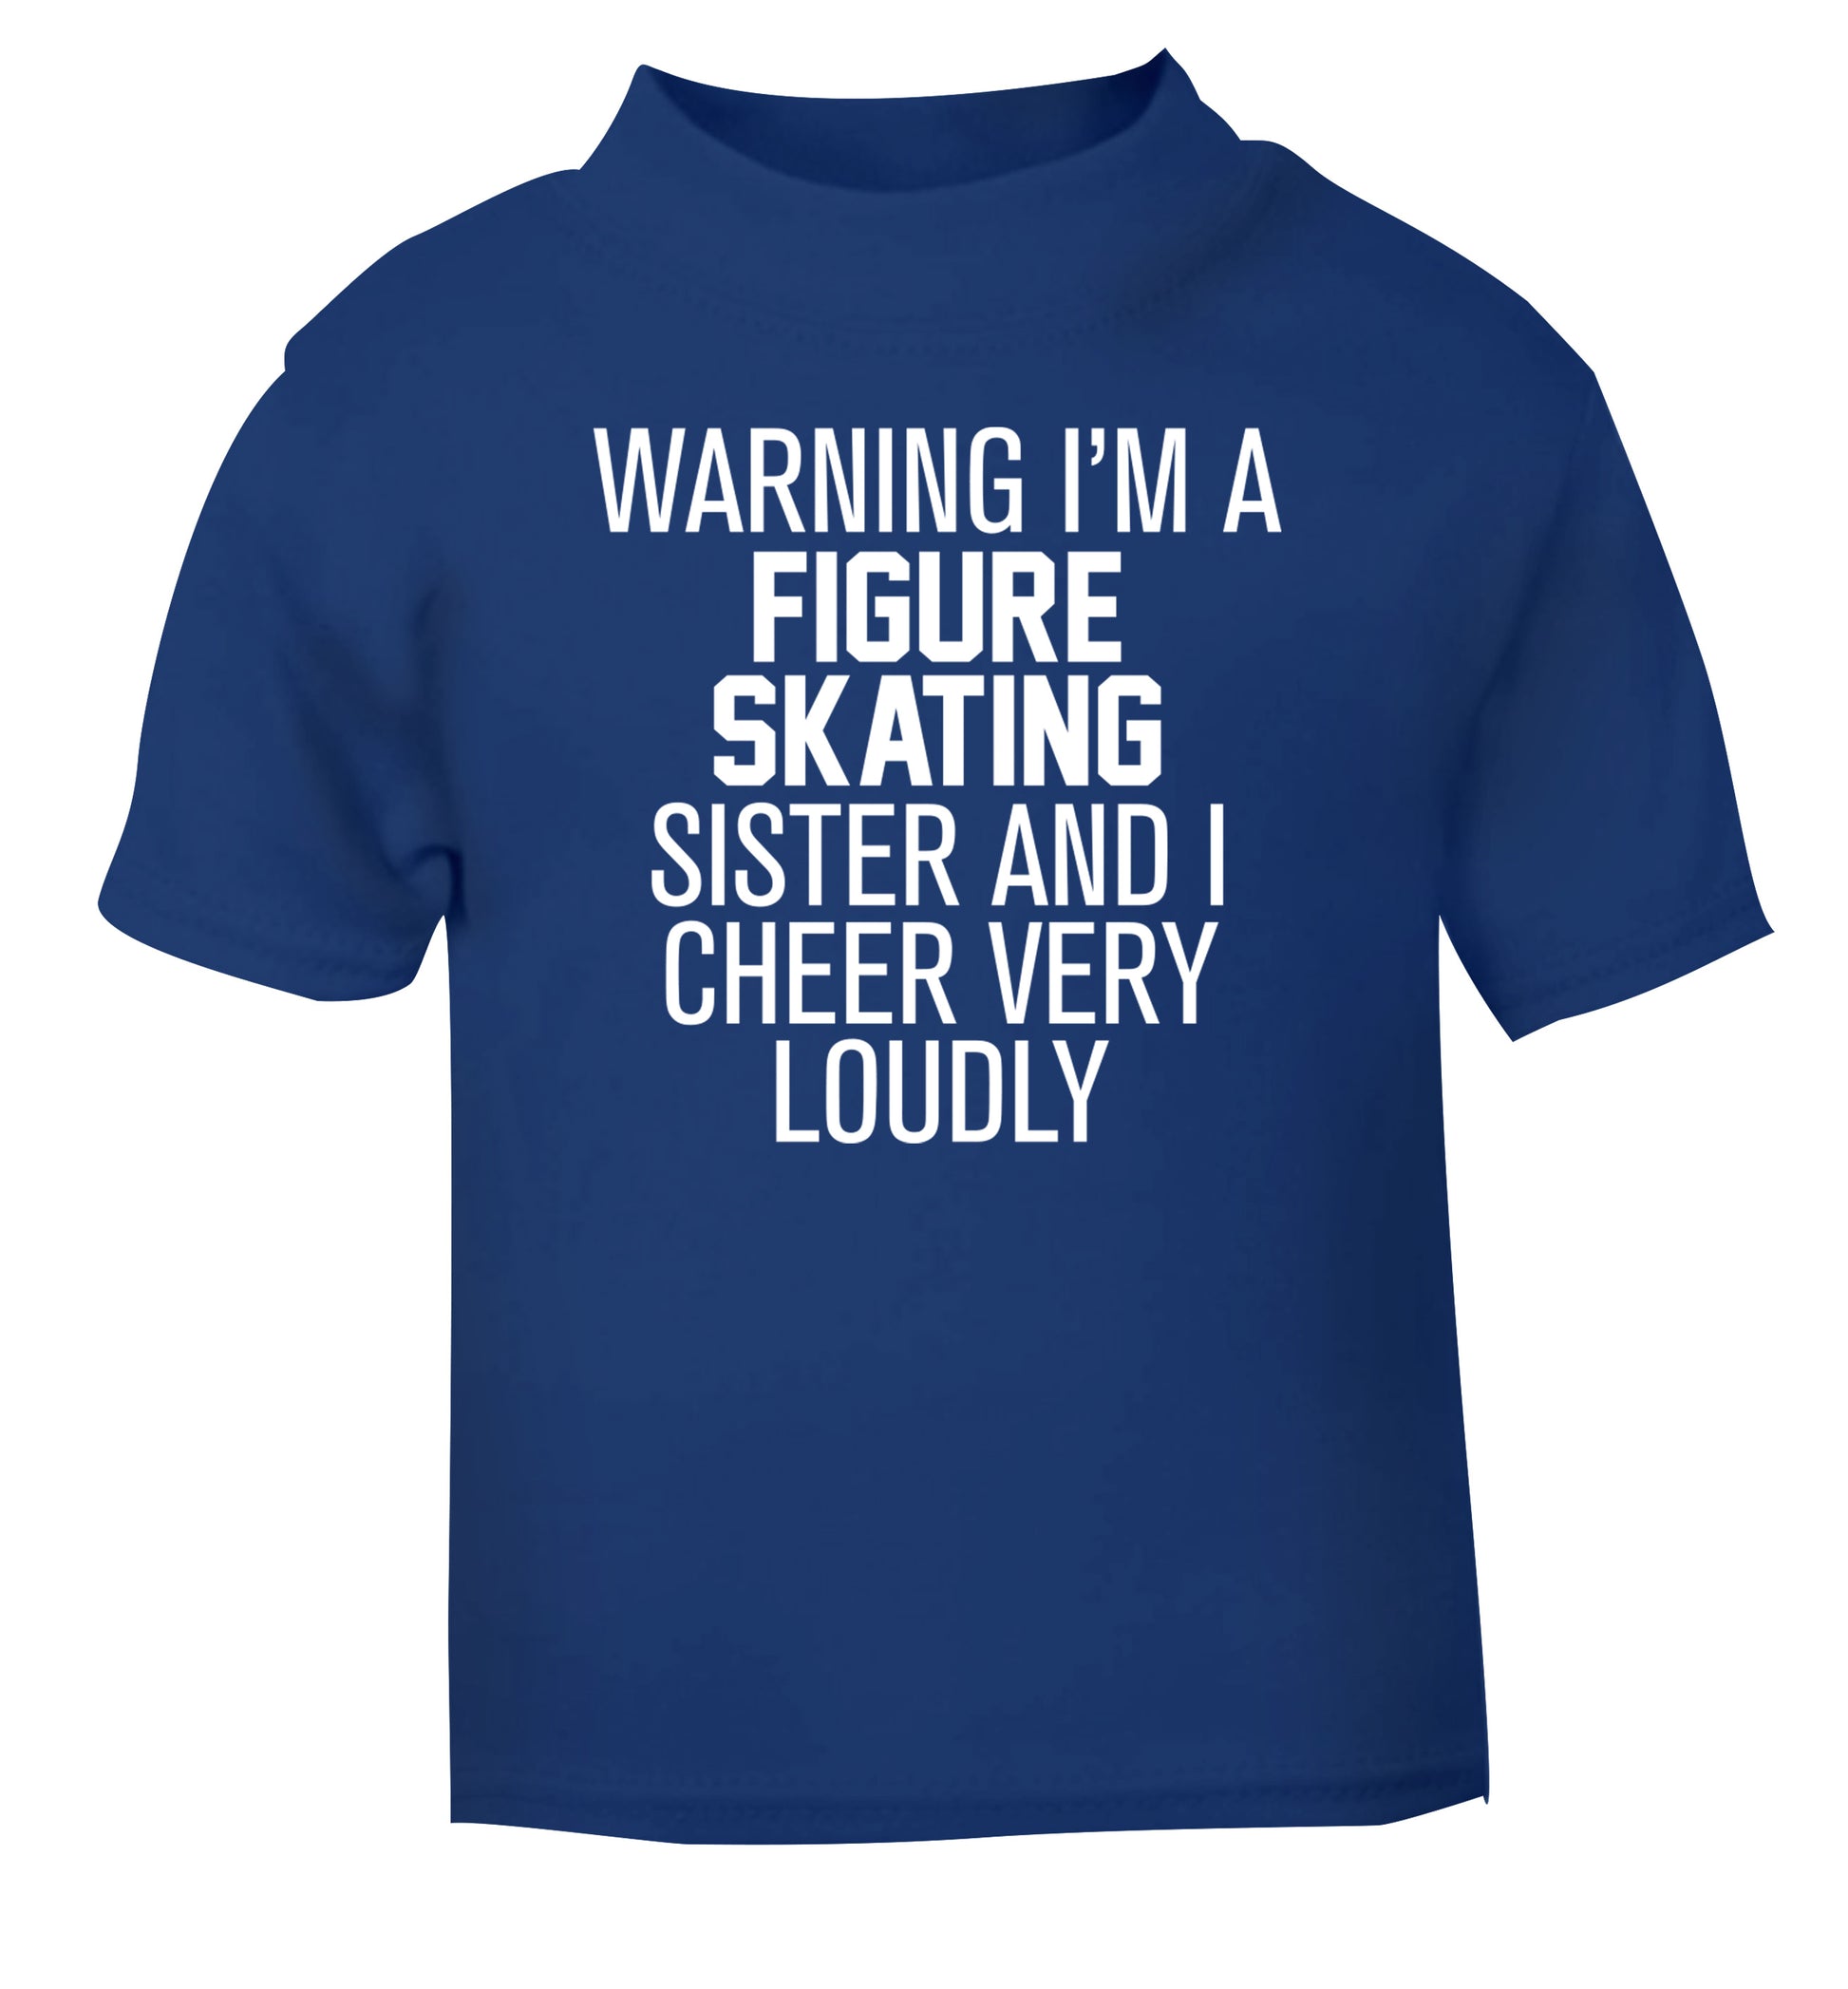 Warning I'm a figure skating sister and I cheer very loudly blue Baby Toddler Tshirt 2 Years